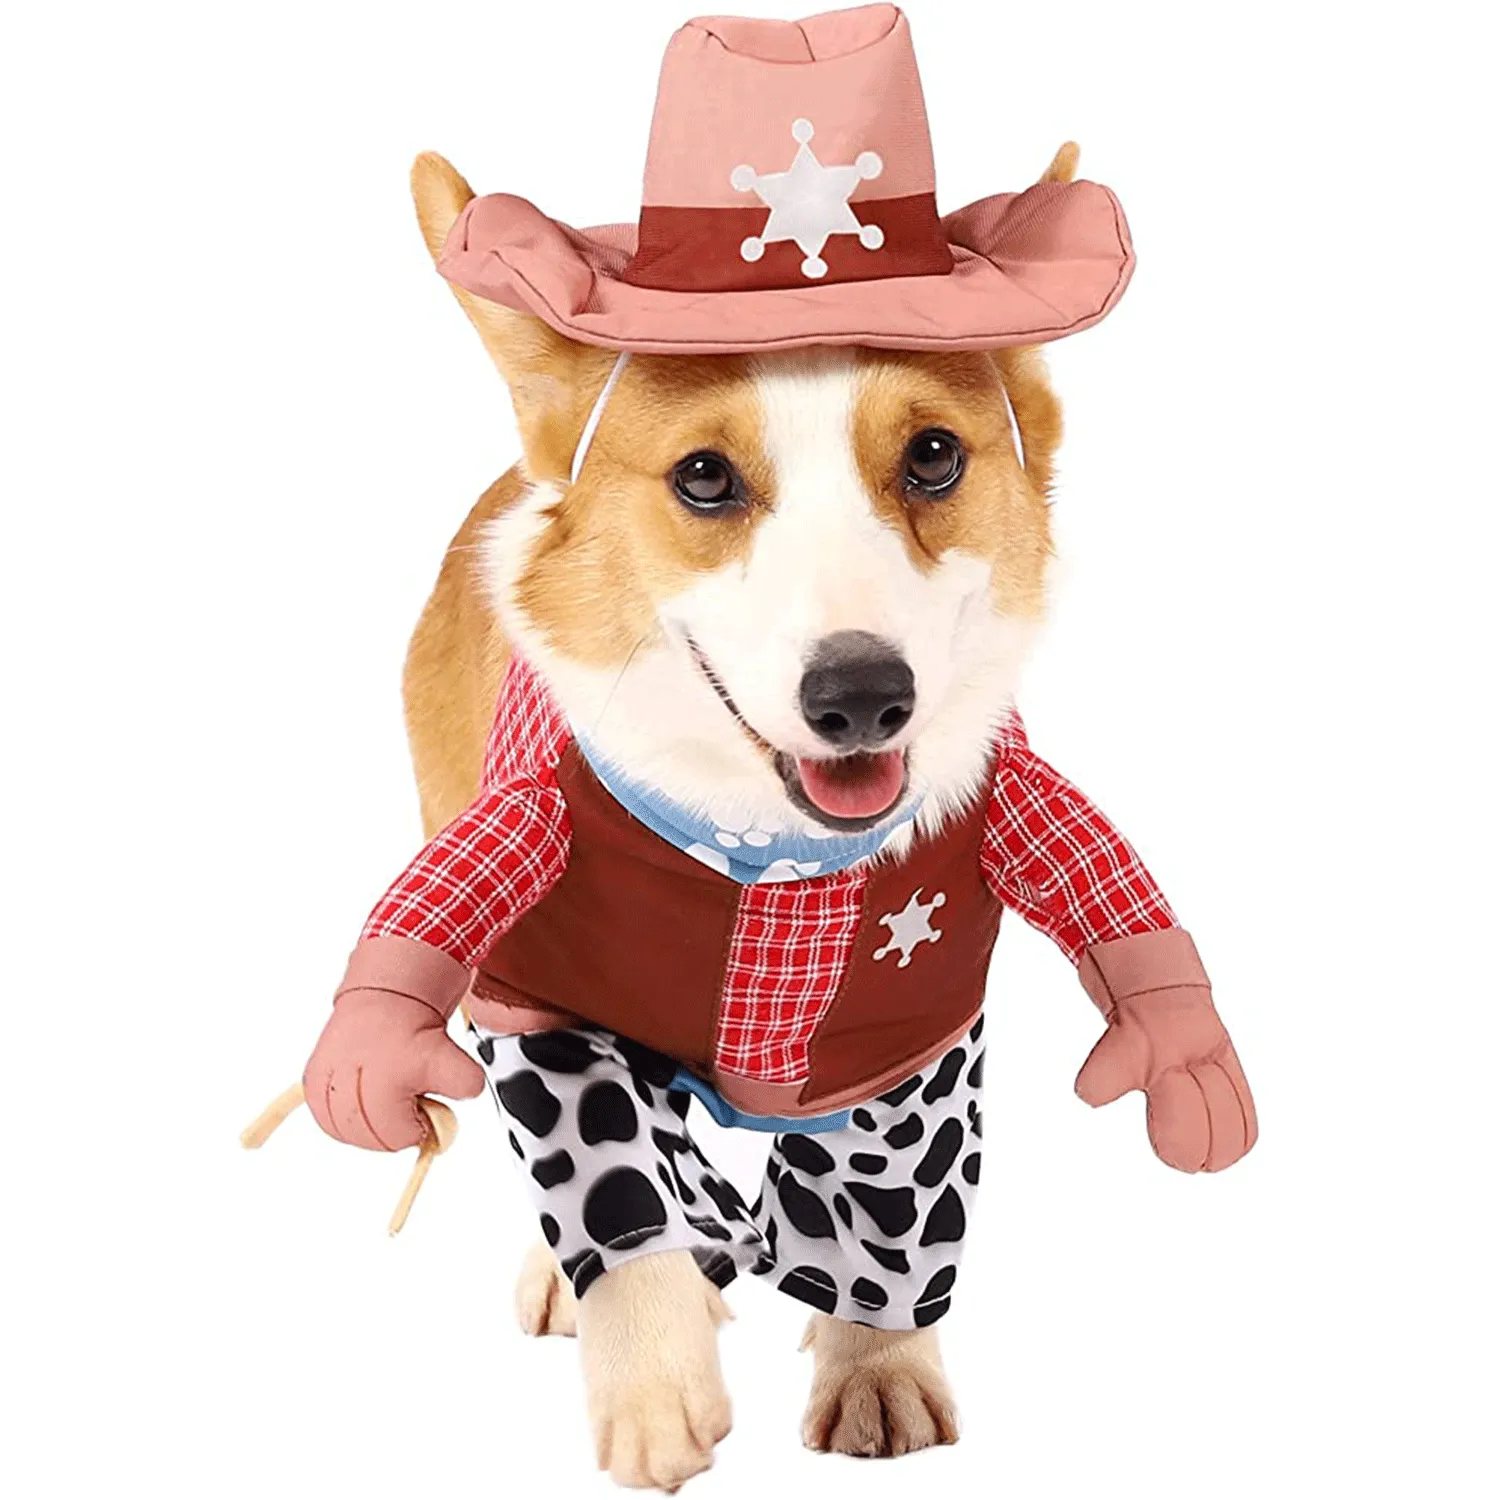 You are currently viewing What Are Favorite Halloween Costumes for Pets?